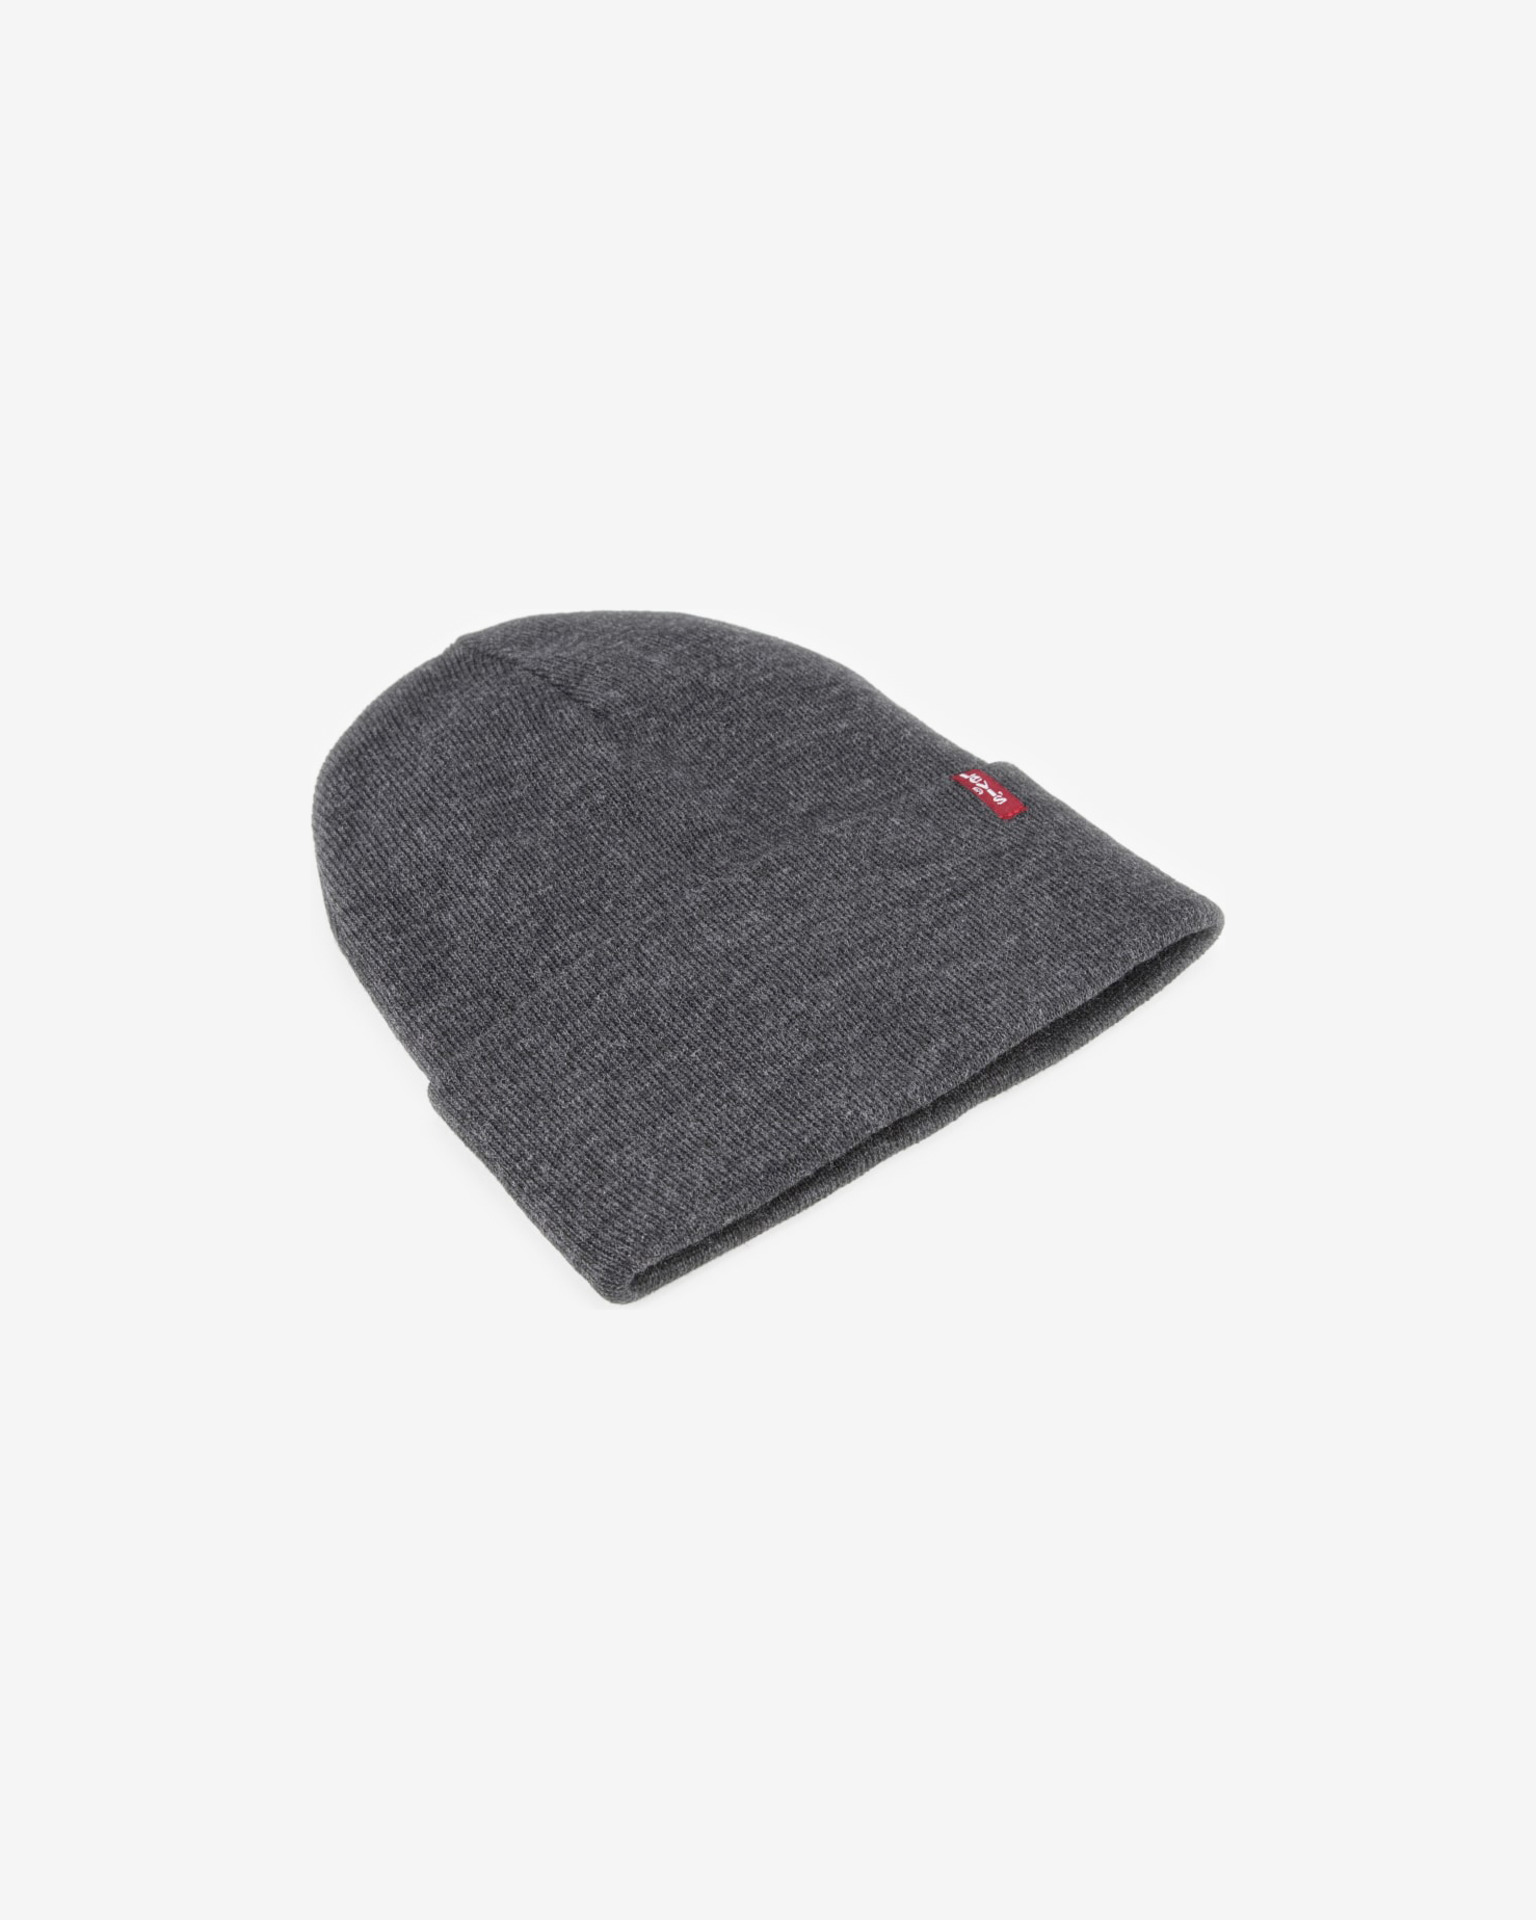 Levi's New Slouchy Beanie W Red - Bonnet - Homme